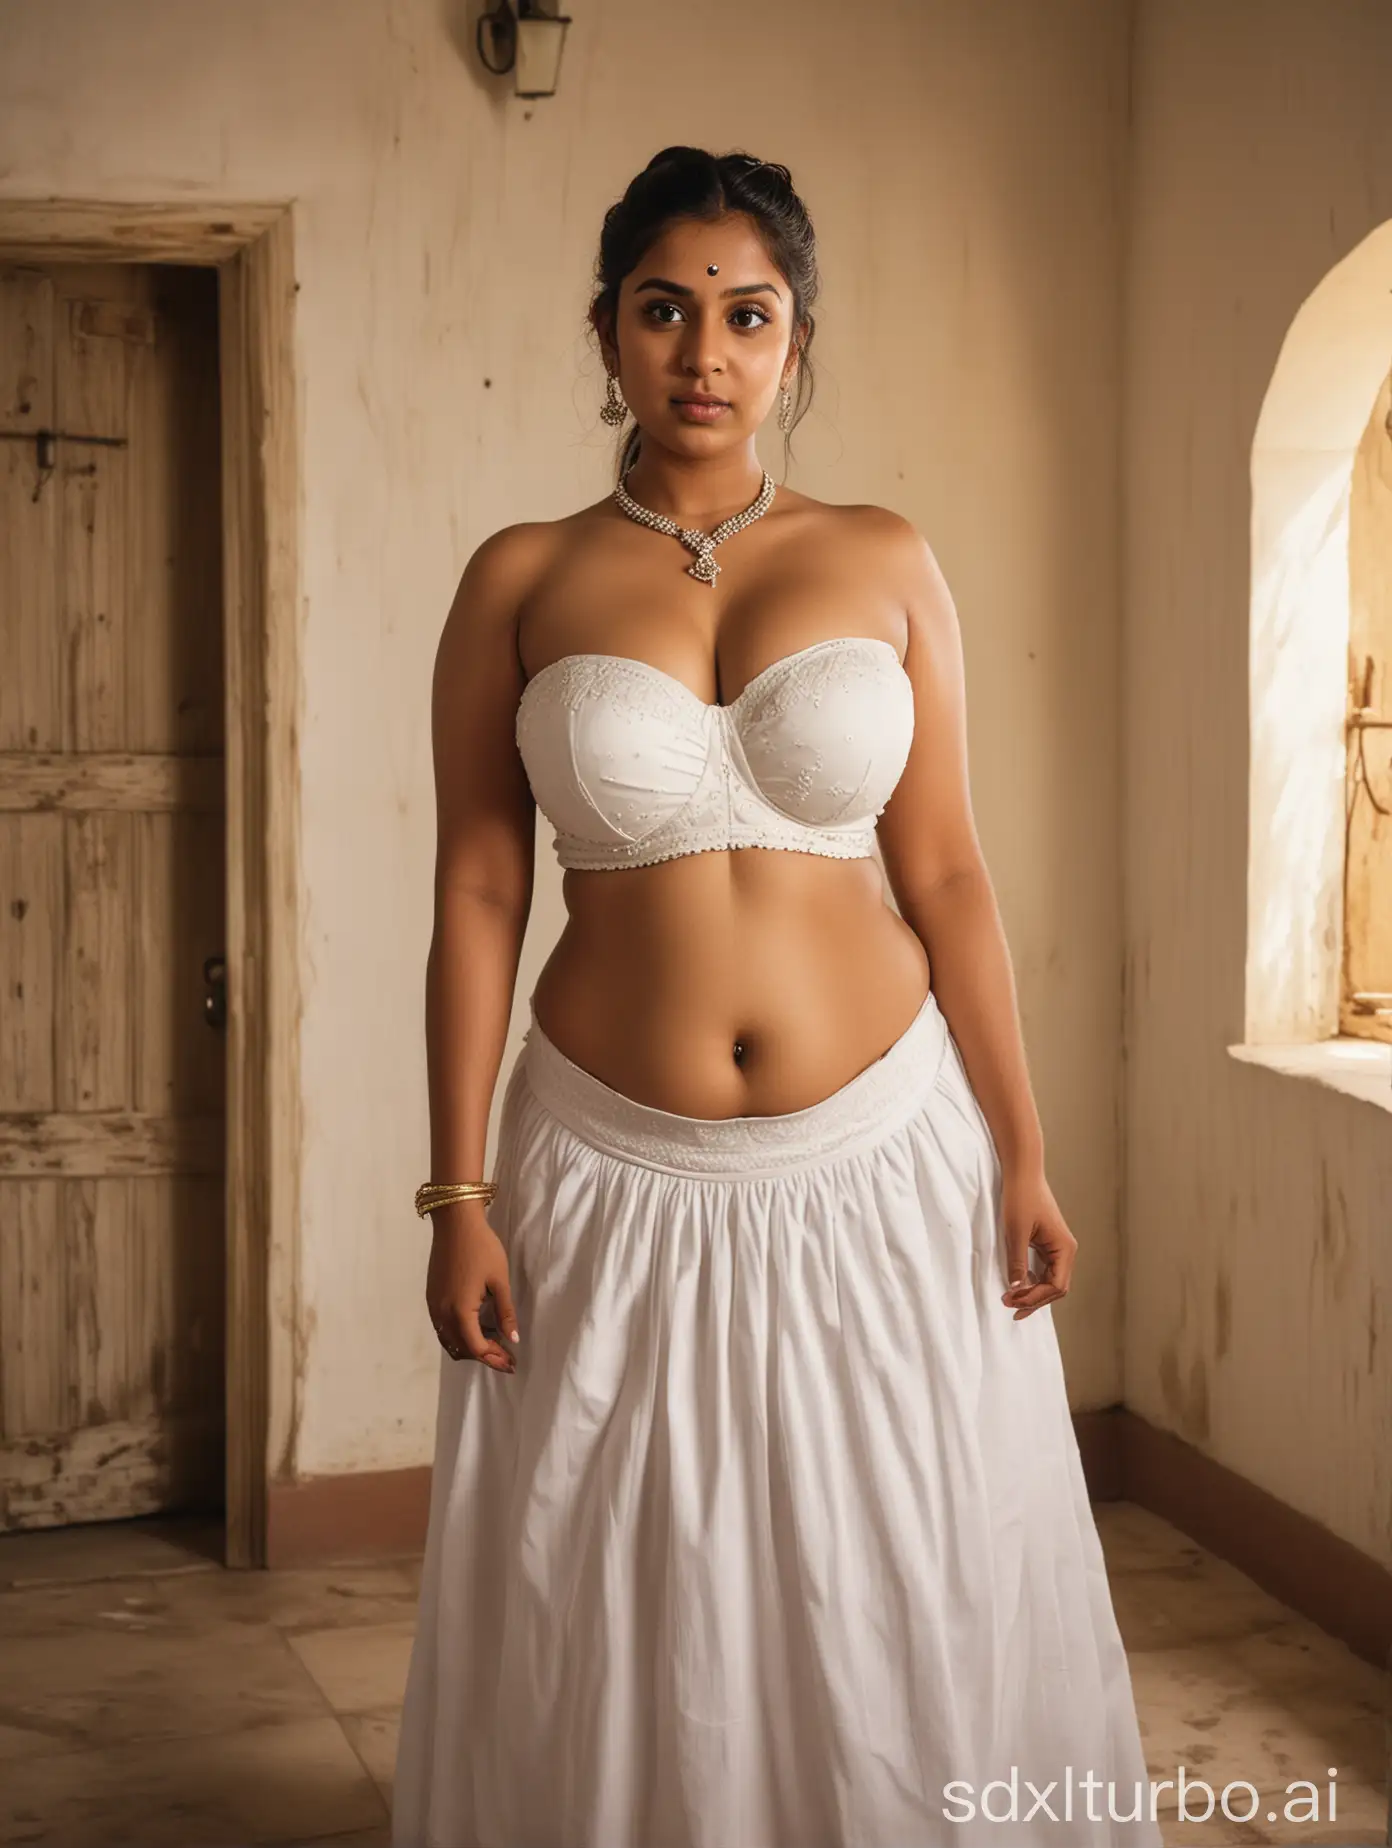 Curvy-Indian-Bride-with-Enormous-Breasts-in-Elegant-White-Attire